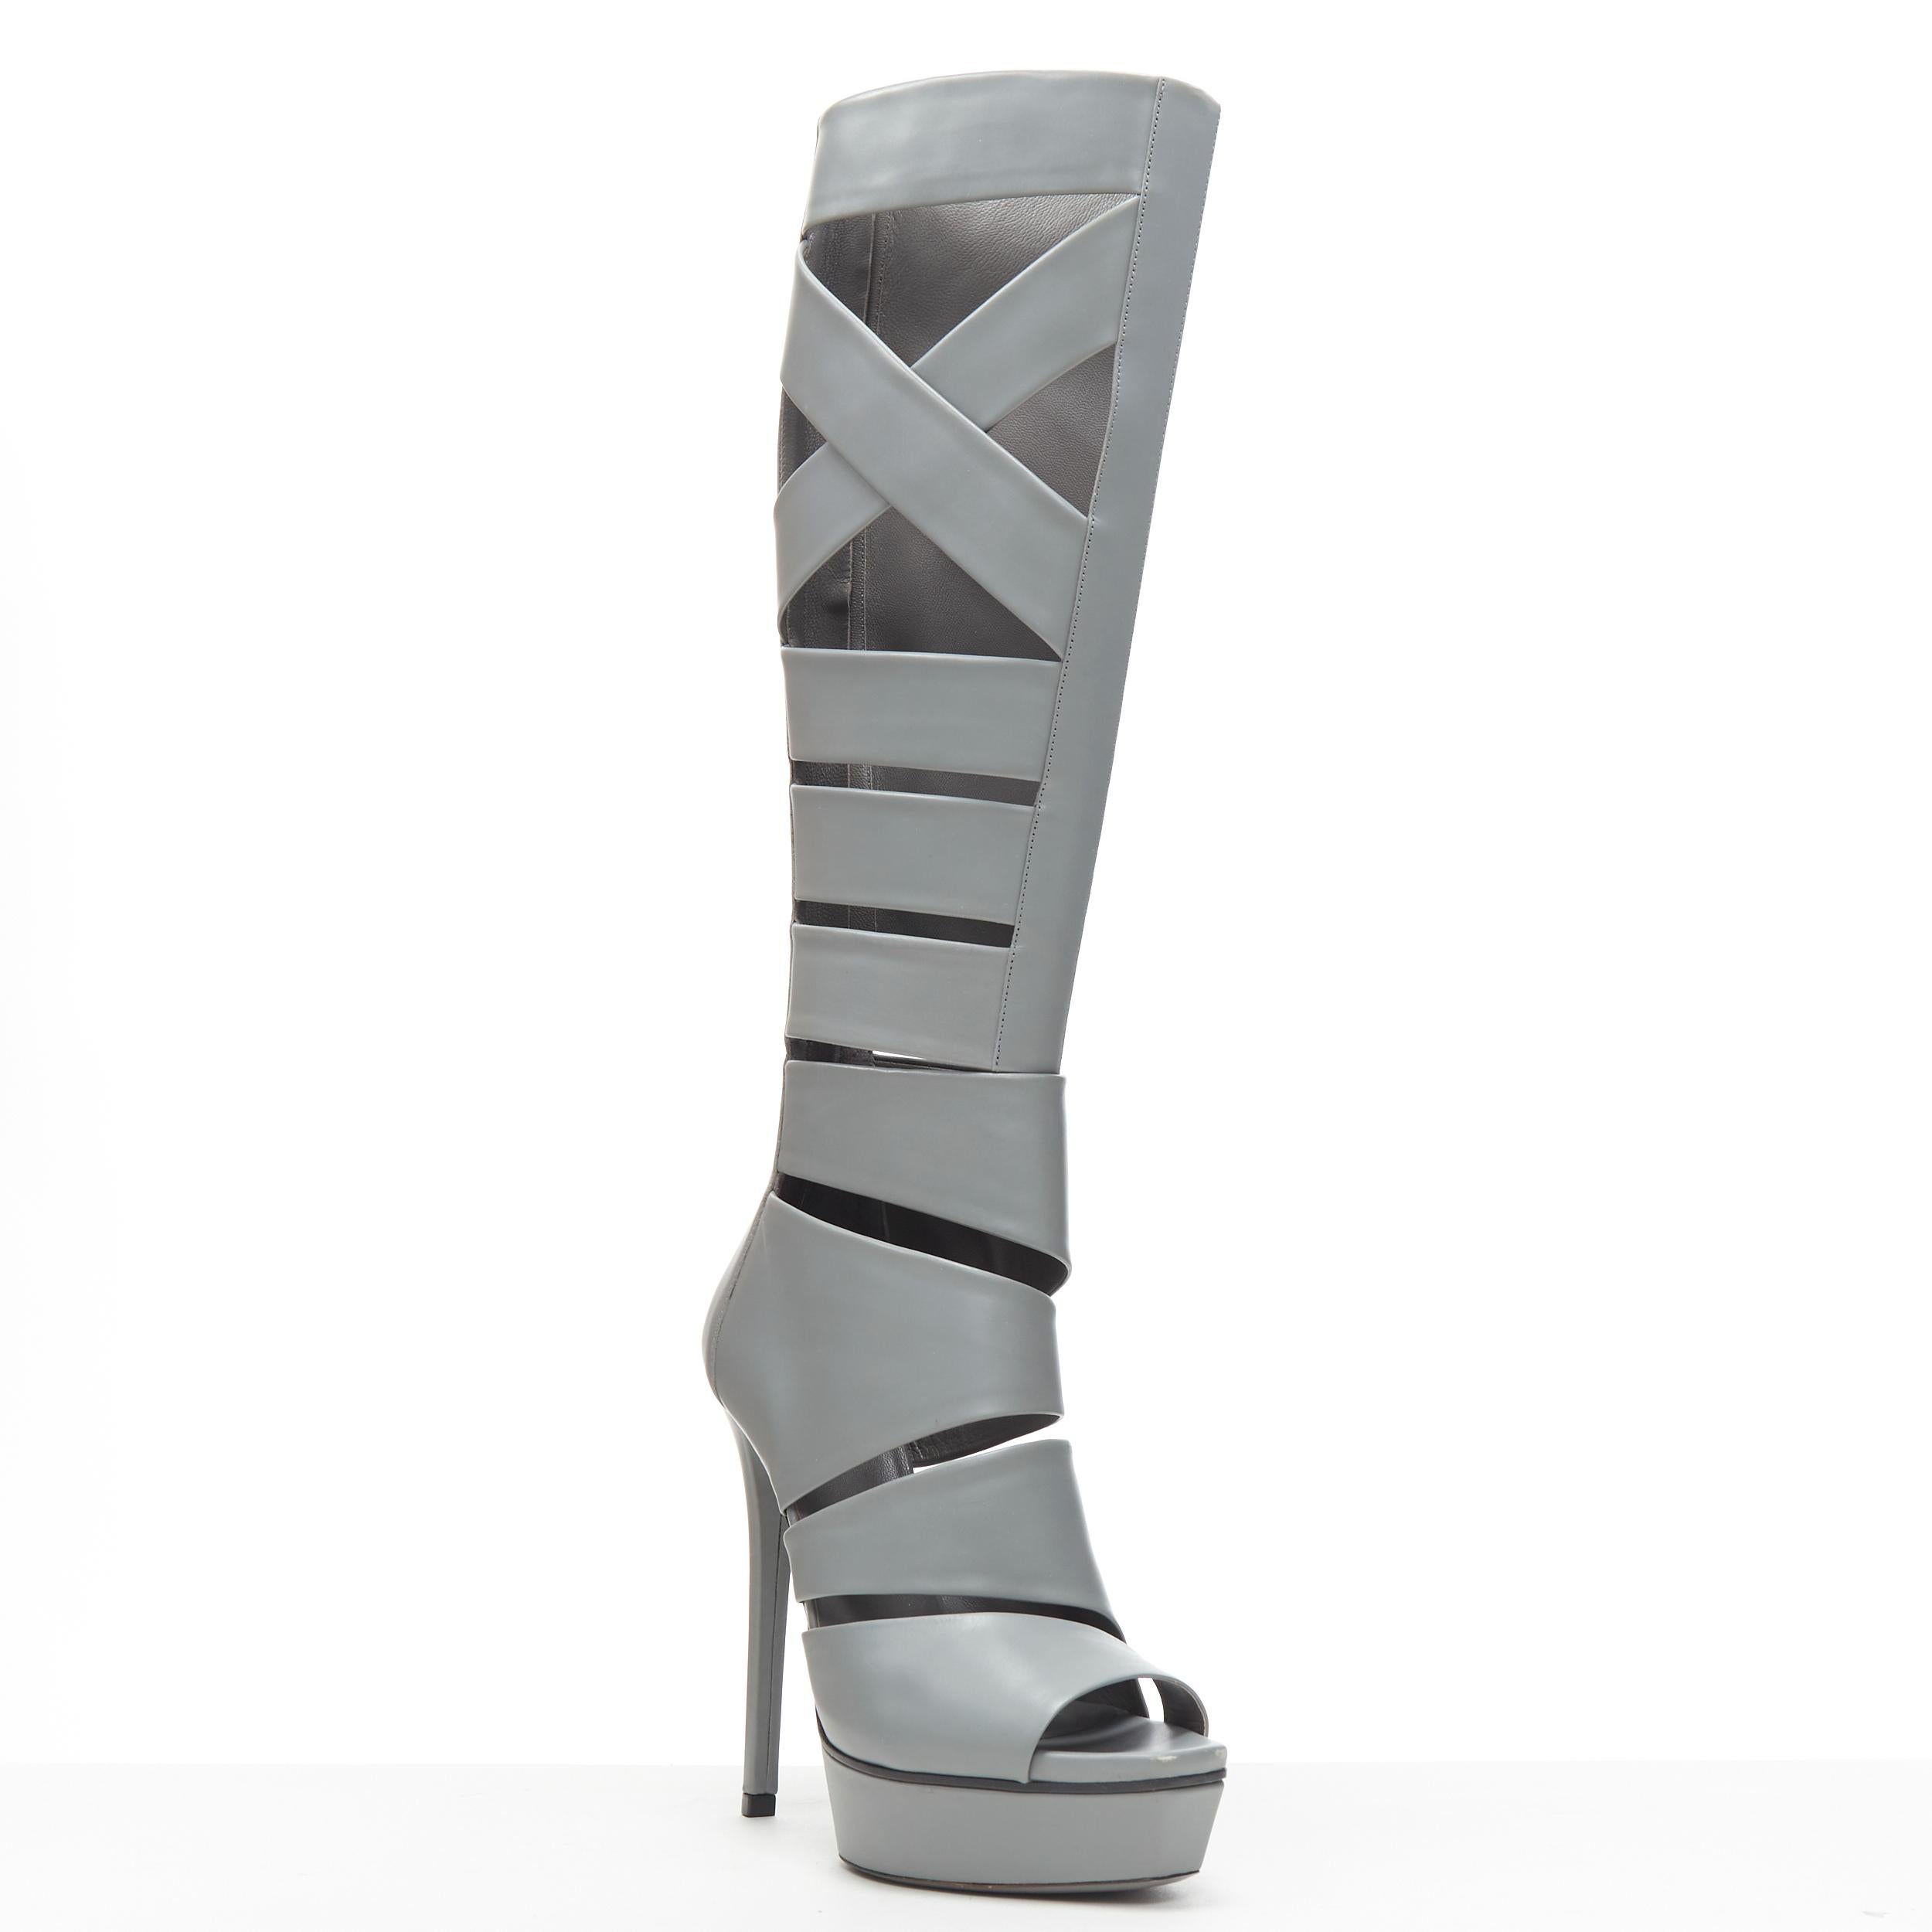 runway GUCCI Runway Helena grey cut out strappy gladiator platform boot EU37 
Reference: GIYG/A00119 
Brand: Gucci 
Material: Leather 
Color: Grey 
Pattern: Solid 
Closure: Zip 
Extra Detail: Cut out gladiator boots. Open toe. Platform sole. 
Made